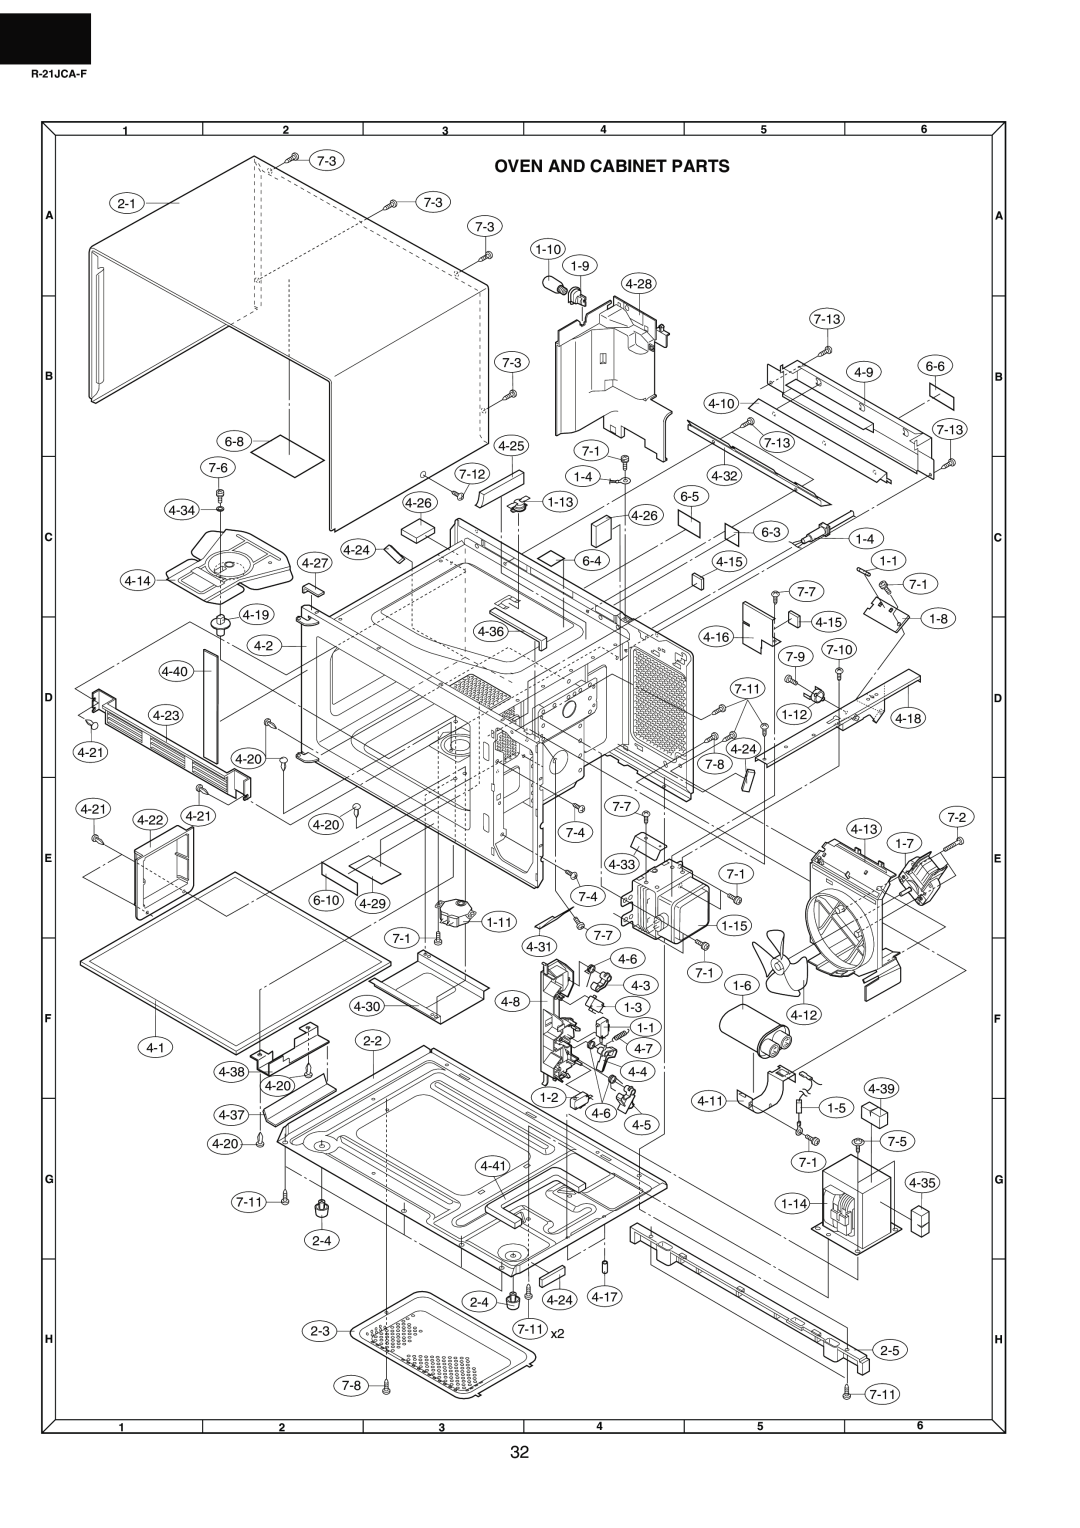 Sharp R-21JCA-F service manual Oven And Cabinet Parts 